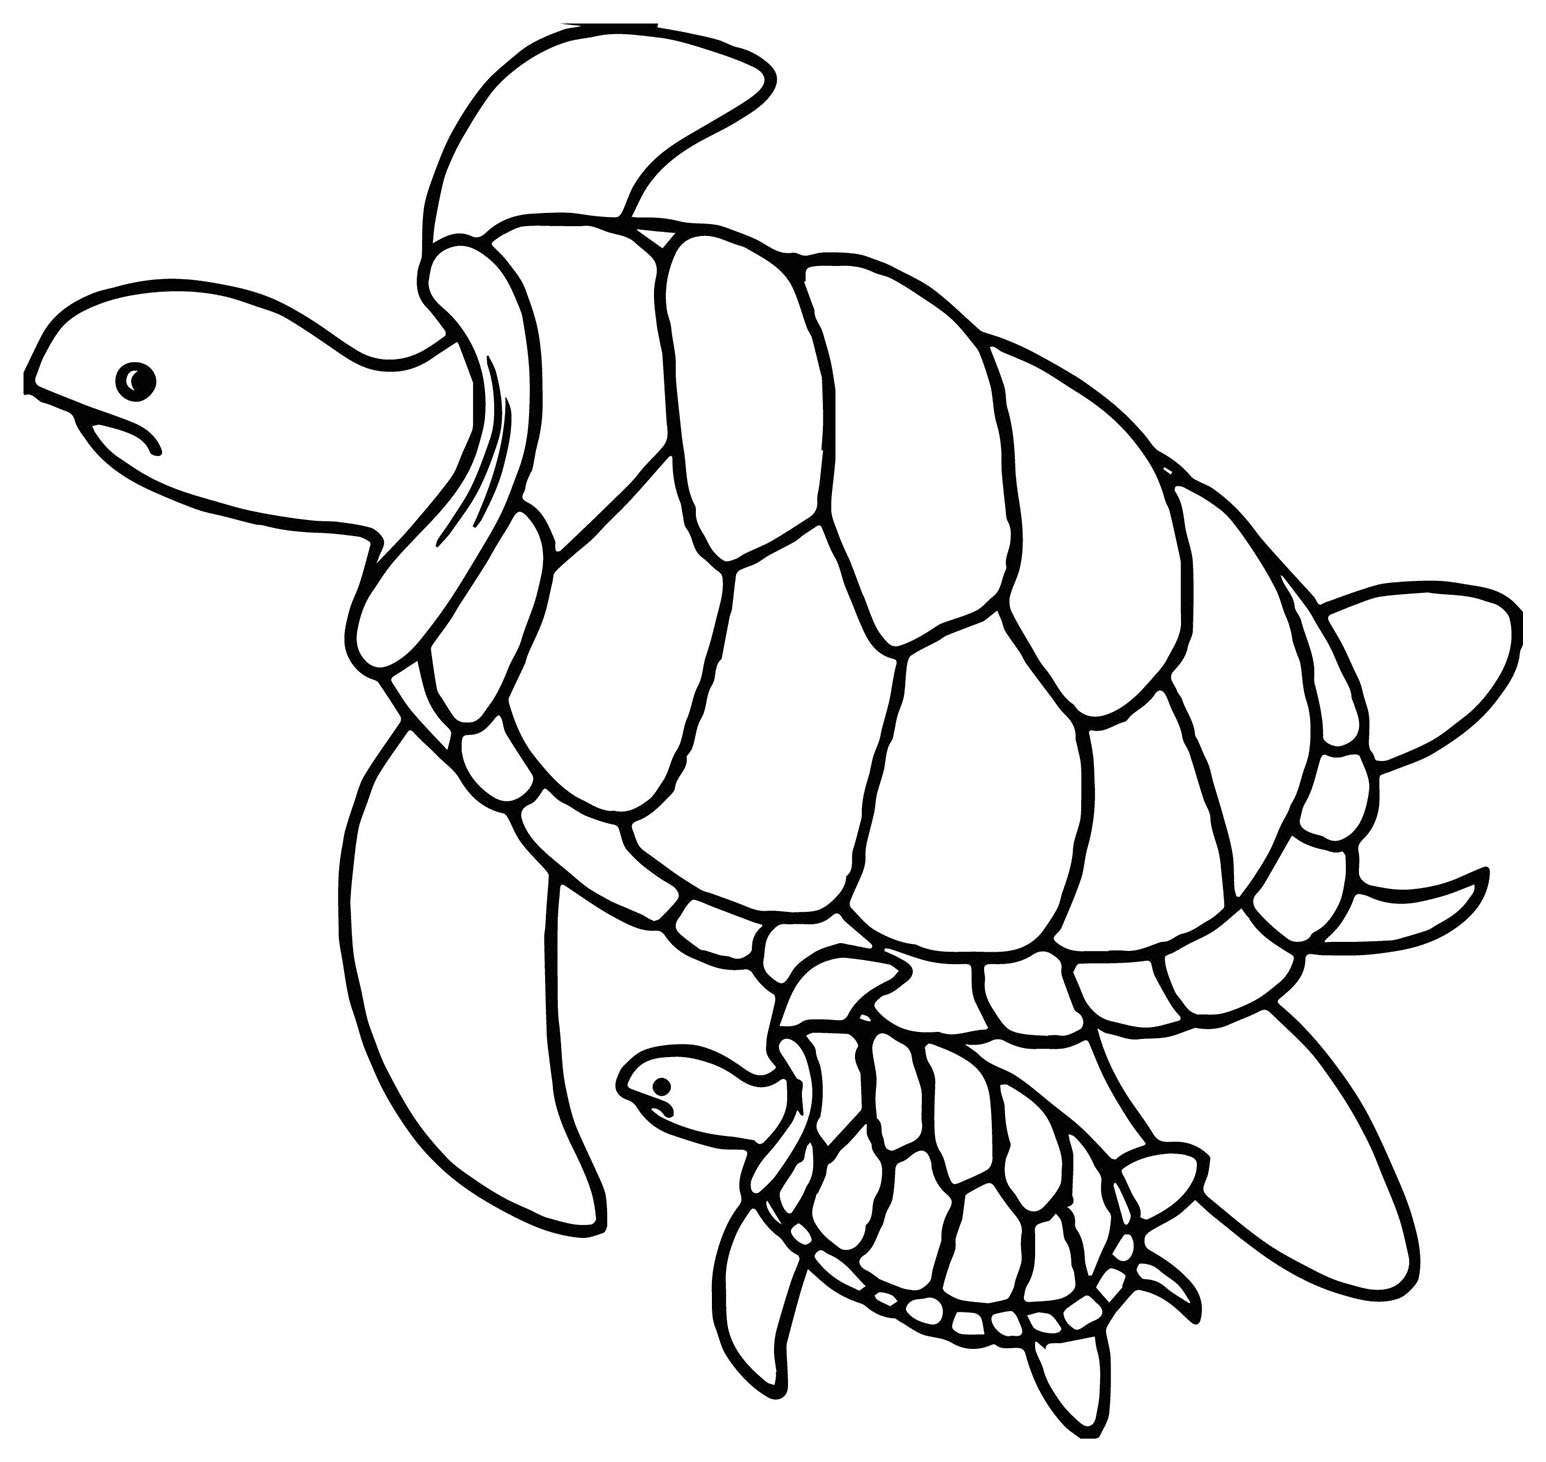 Printable Coloring Pages Turtle